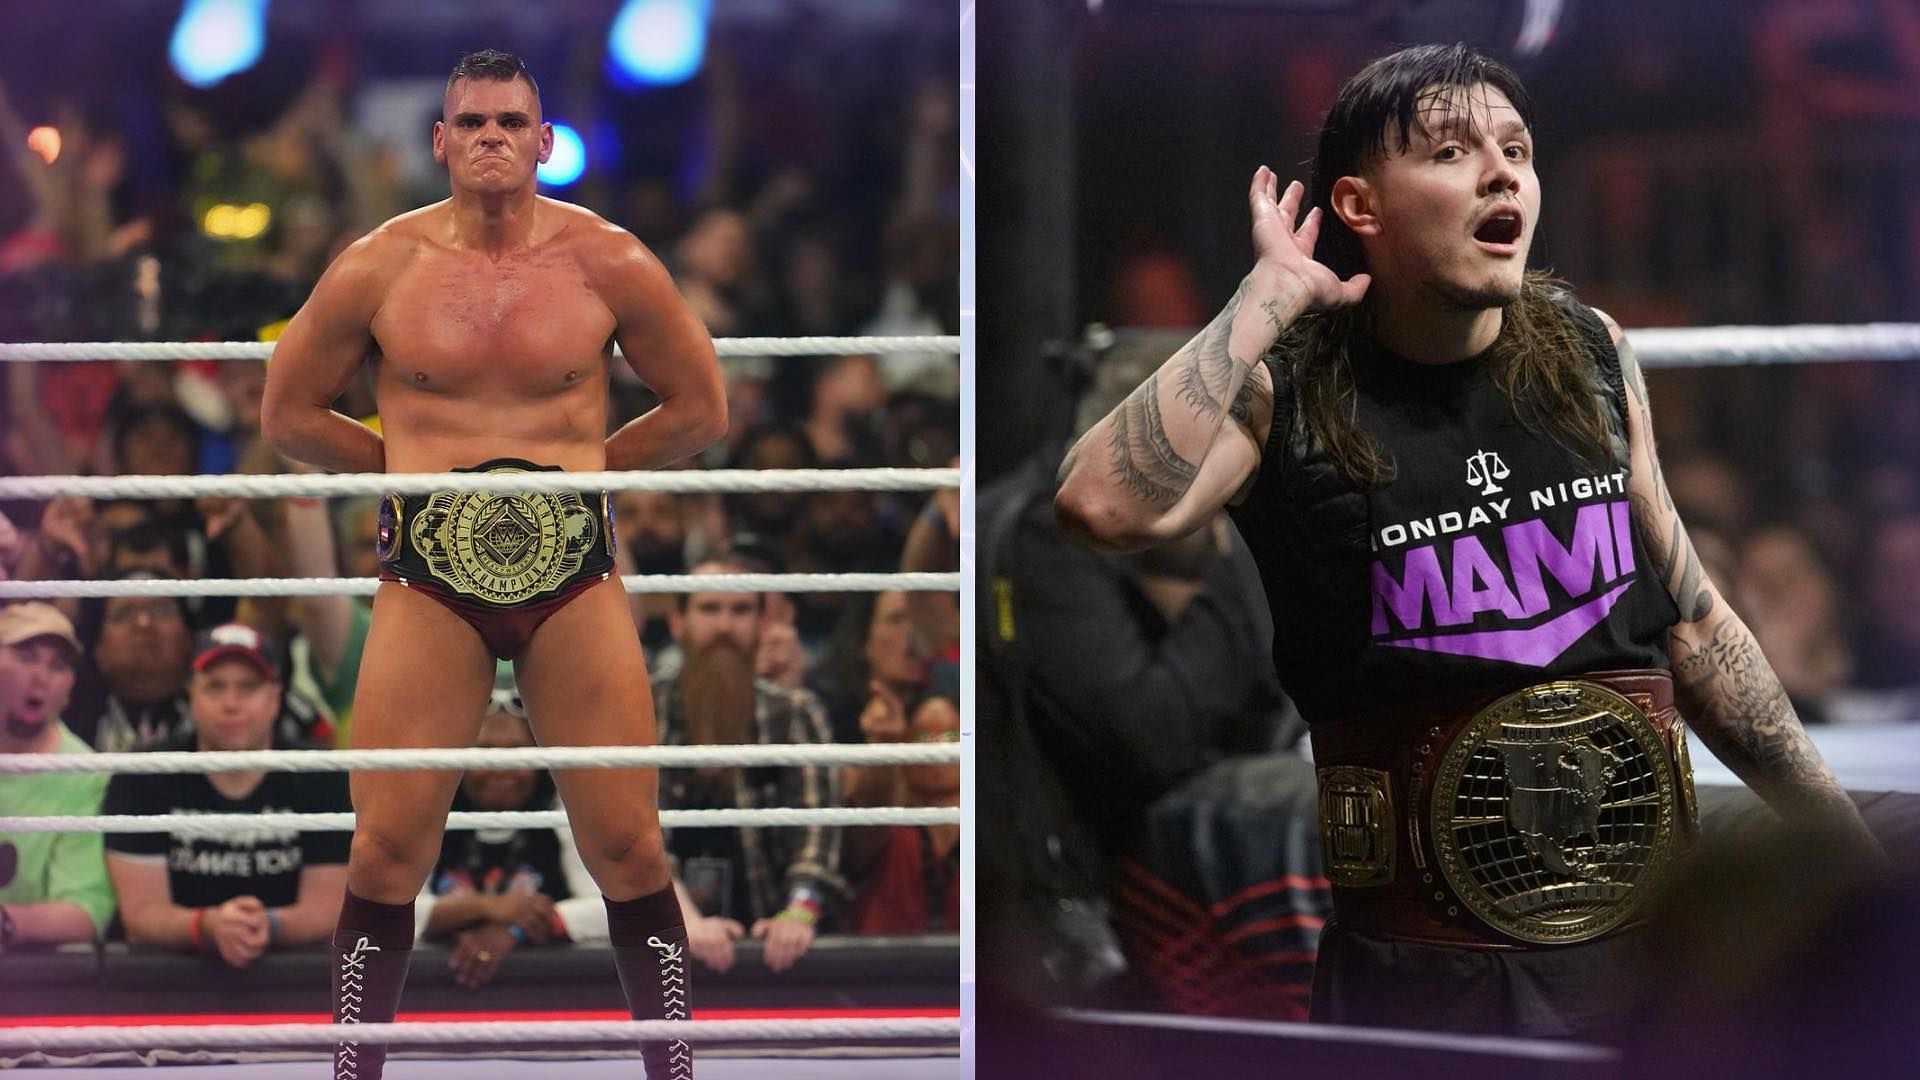 A major Fatal 4-Way Match with Intercontinental Championship implications will be on WWE RAW